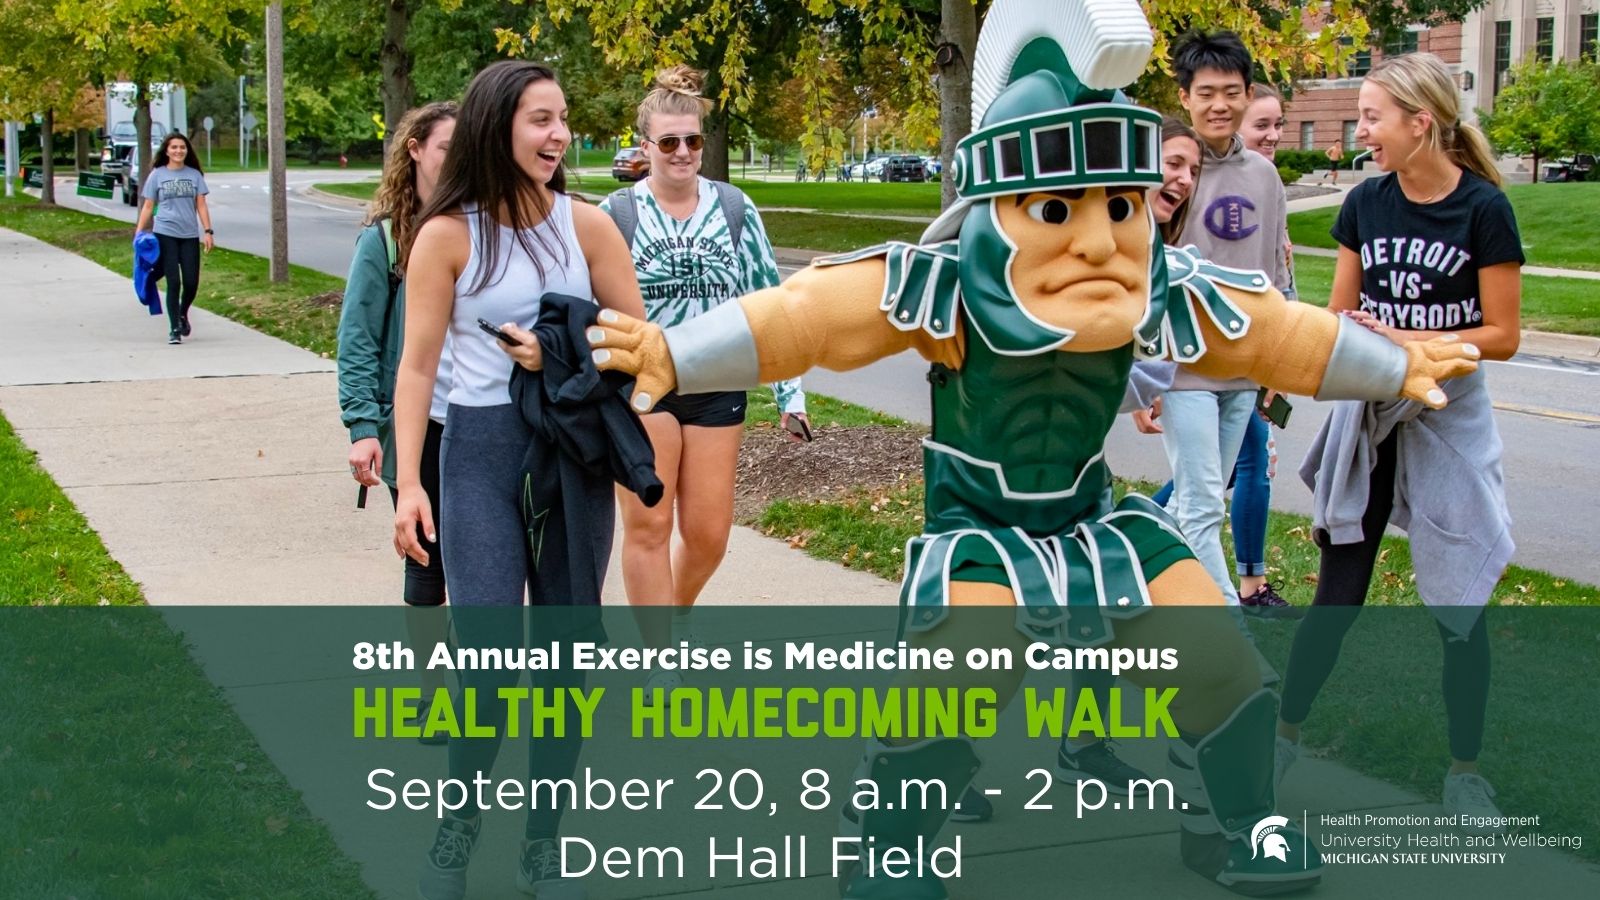 8th Annual Healthy Homecoming Walk to Take Place September 20th